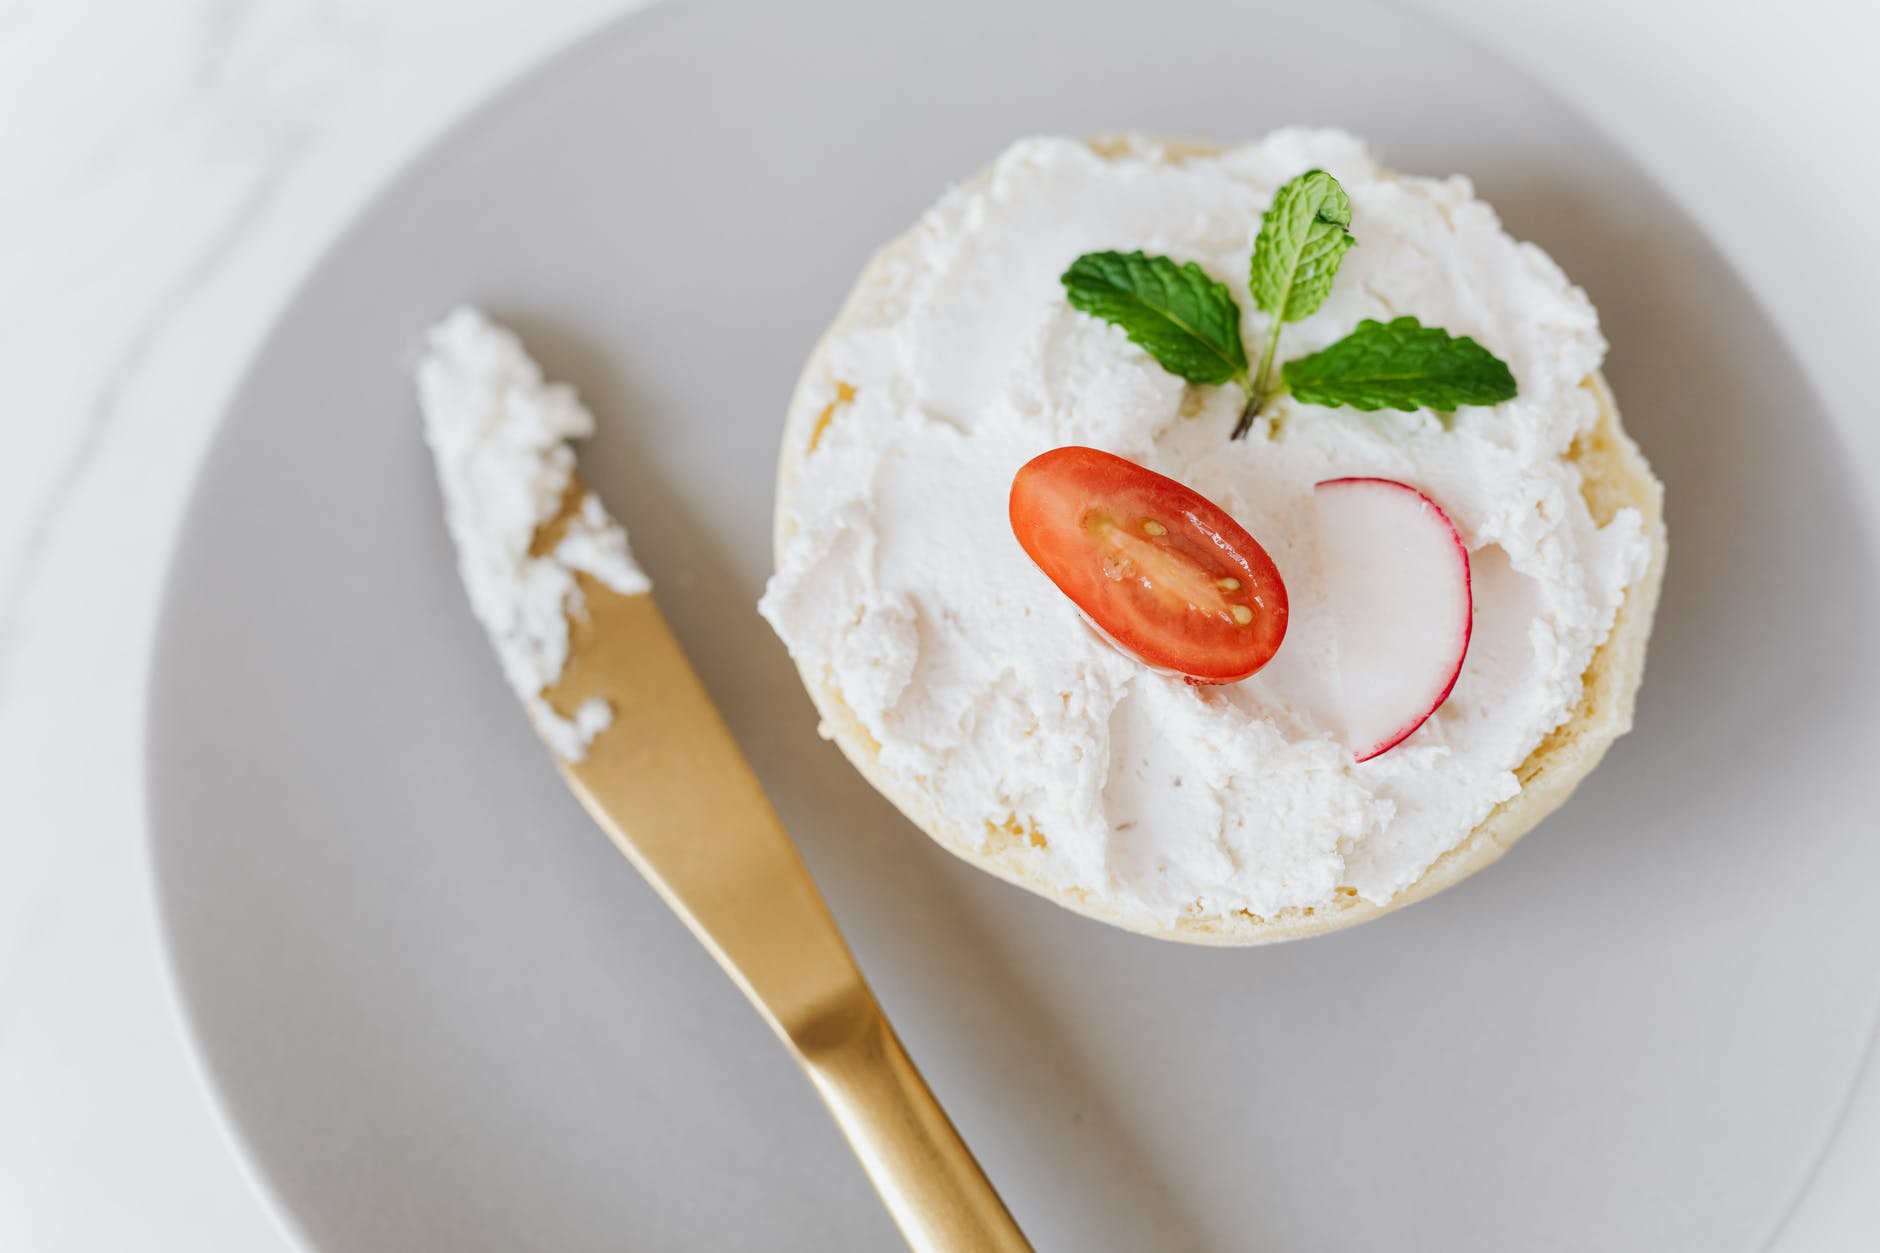 Dry curd cottage cheese is described as buttery, with just a hint of tang. Overall, it has a mild taste. This cheese is somewhat moist, as are a lot of soft cheeses, but is still dry enough to slice or crumble.